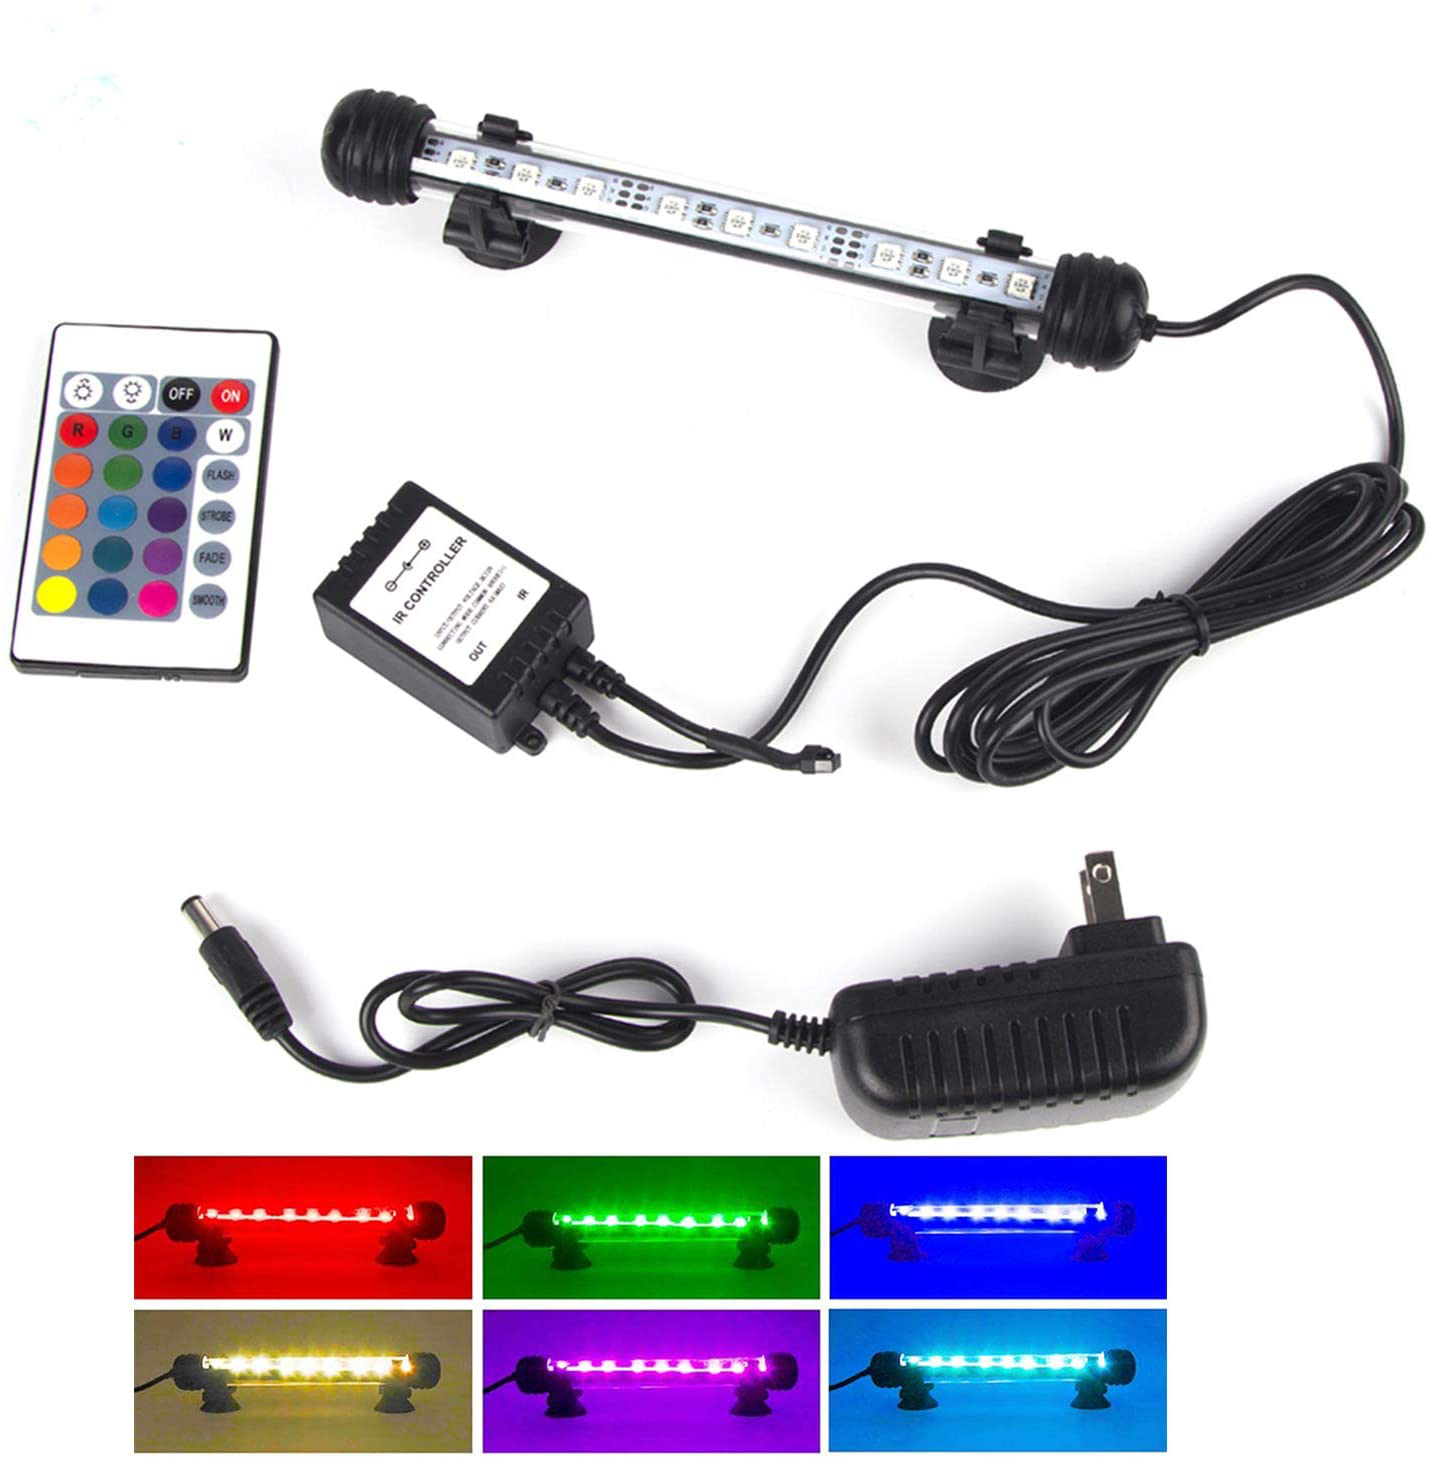 Color Changing Aquarium Lights LED Underwater Fish Tank Light RGB Waterproof Dim Adjustable Memory Submersible Remote Control Sucker Hang Lights Background Decor Waterfall Lights, 27 Inch